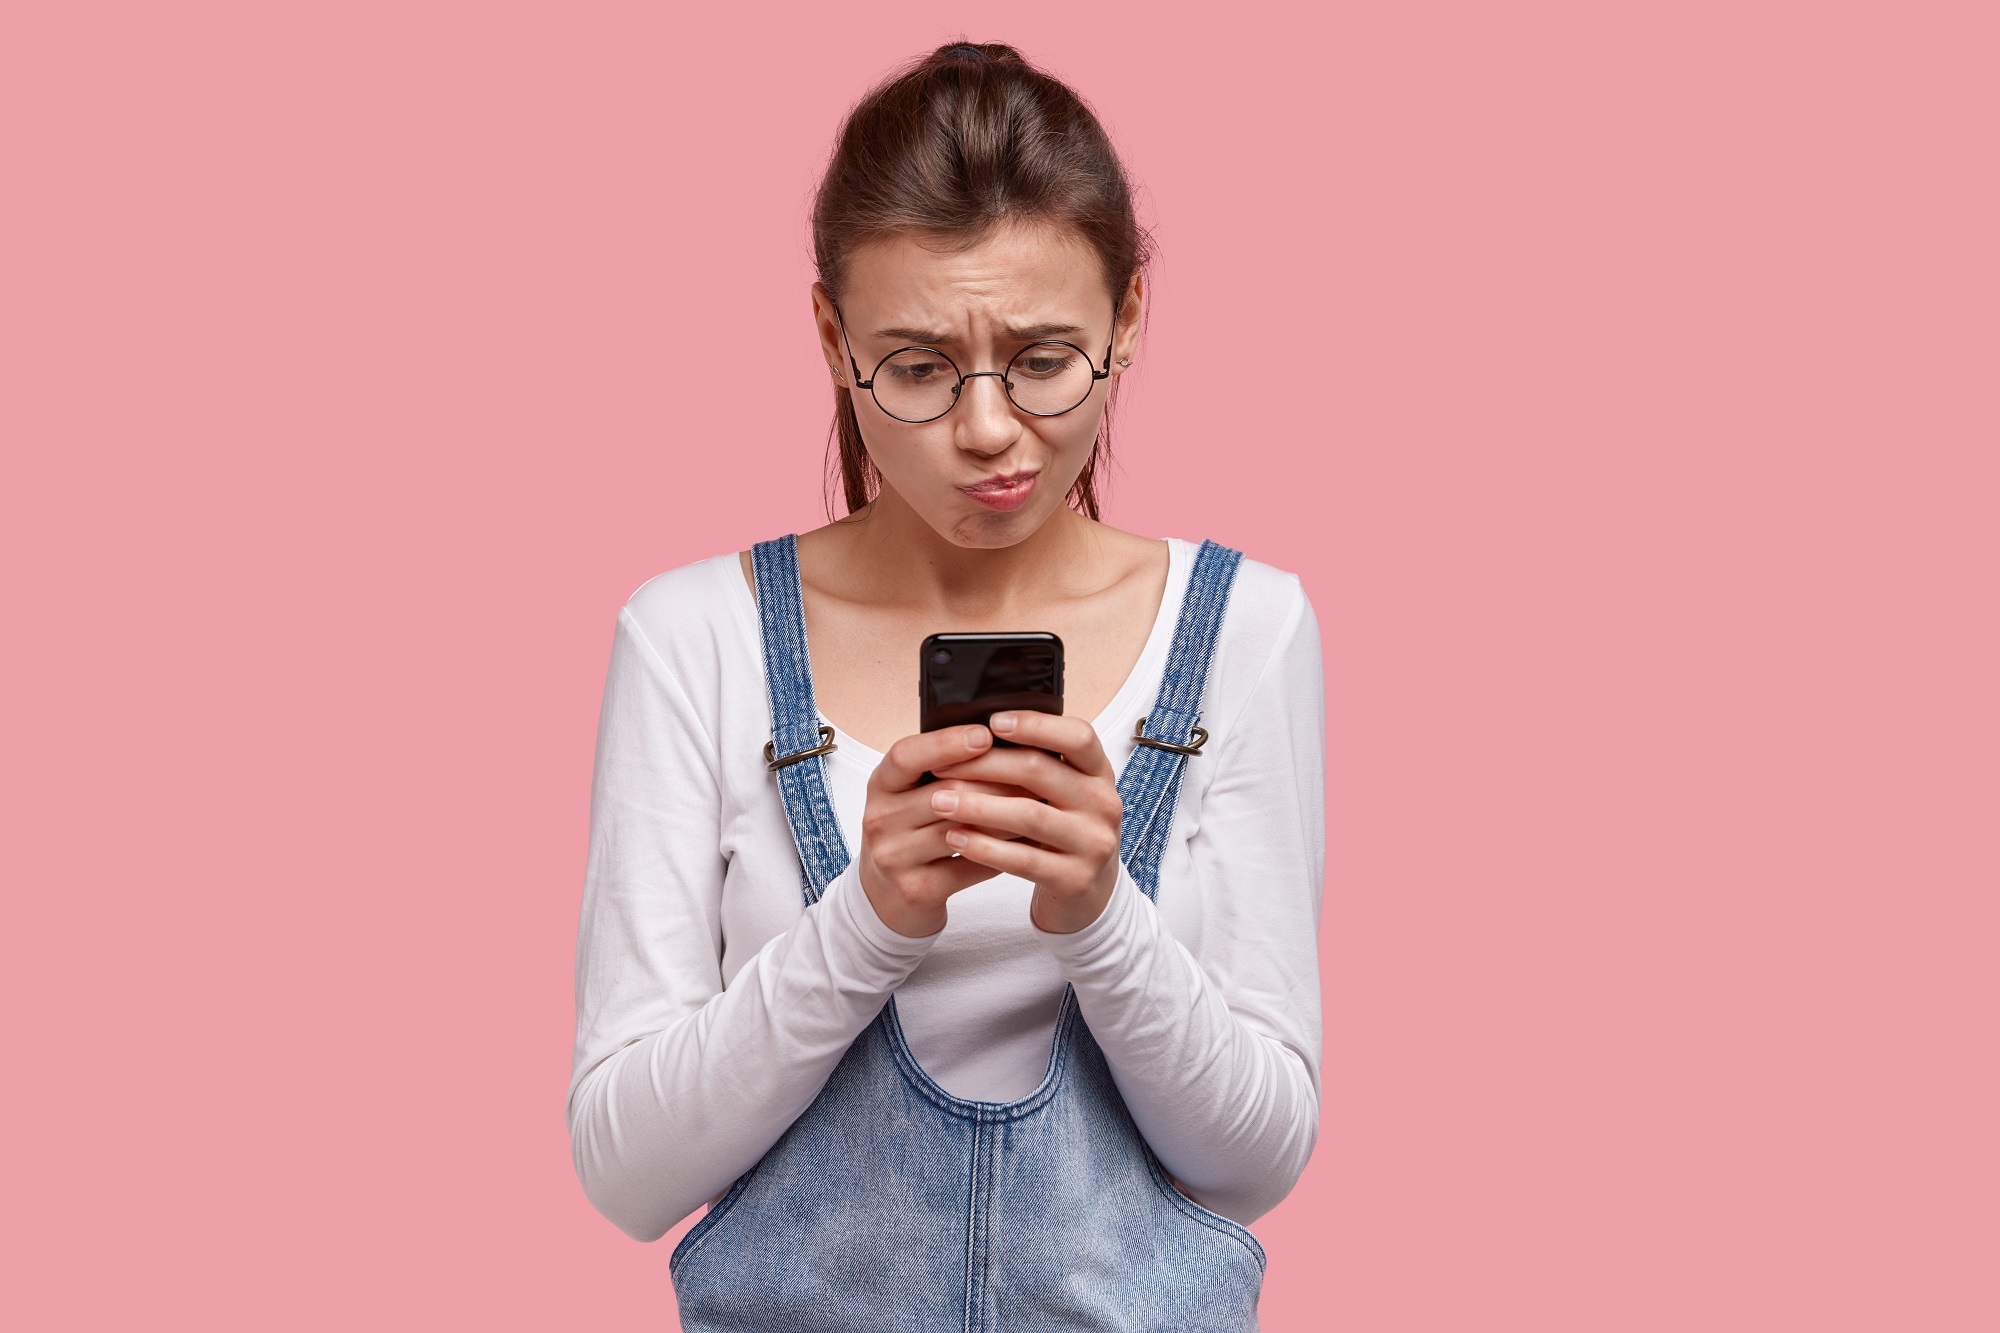 unhappy lady holds smart phone, has dissatisfied expression as battery died, cant watch video, wears round spectacles, denim sarafan, poses over pink background, has negative opinion about something